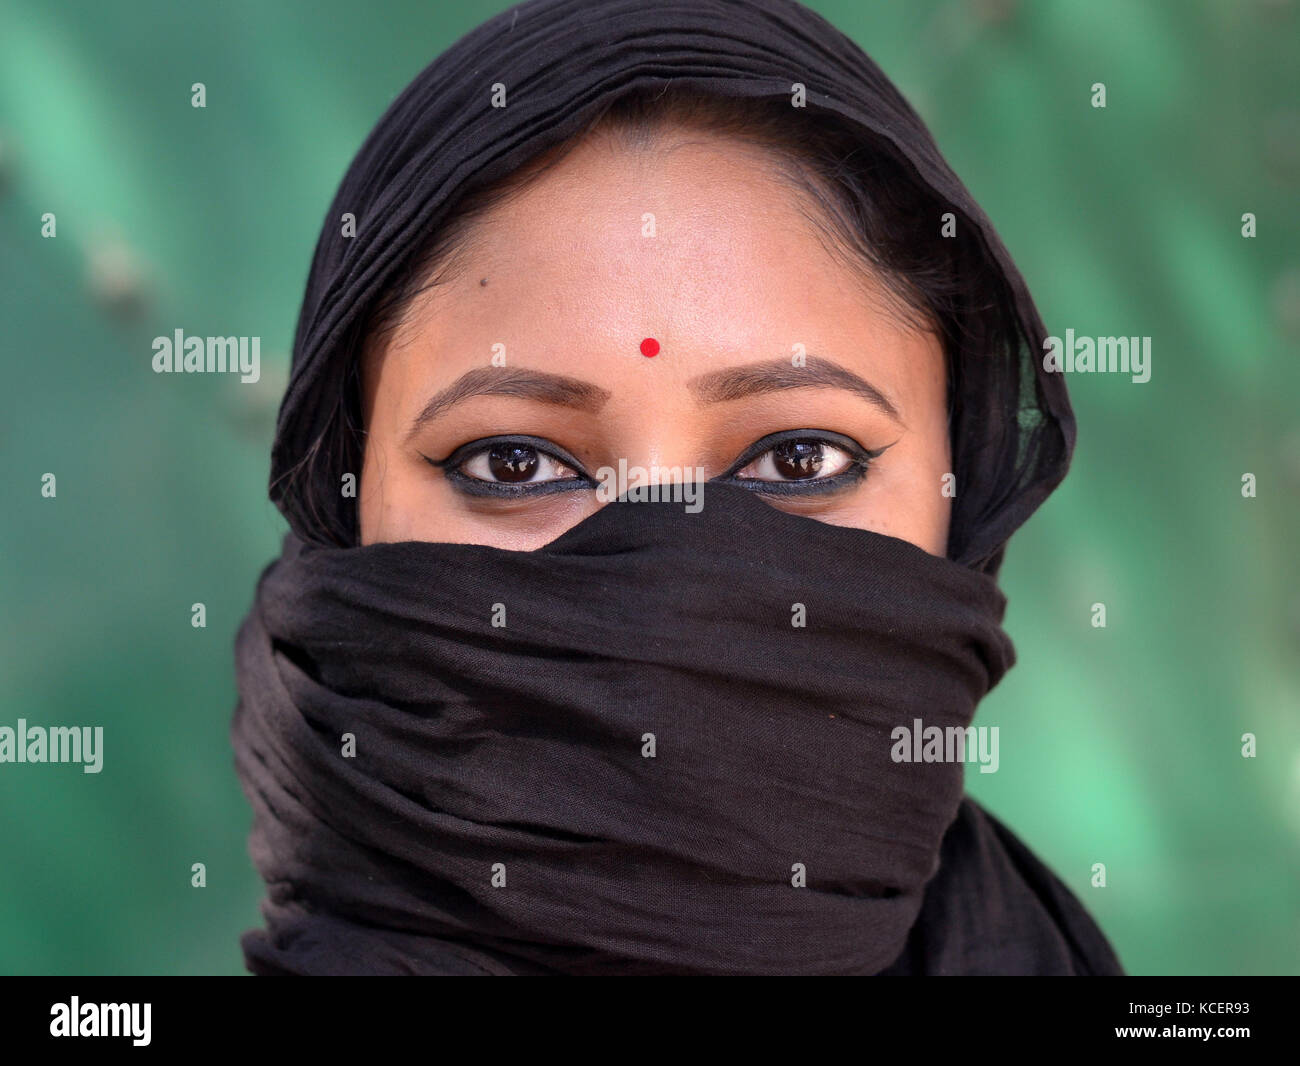 Full-face view of a young Assamese Hindu beauty with almond-shaped eyes, covering her hair and face with a secular, trendy black headscarf Stock Photo